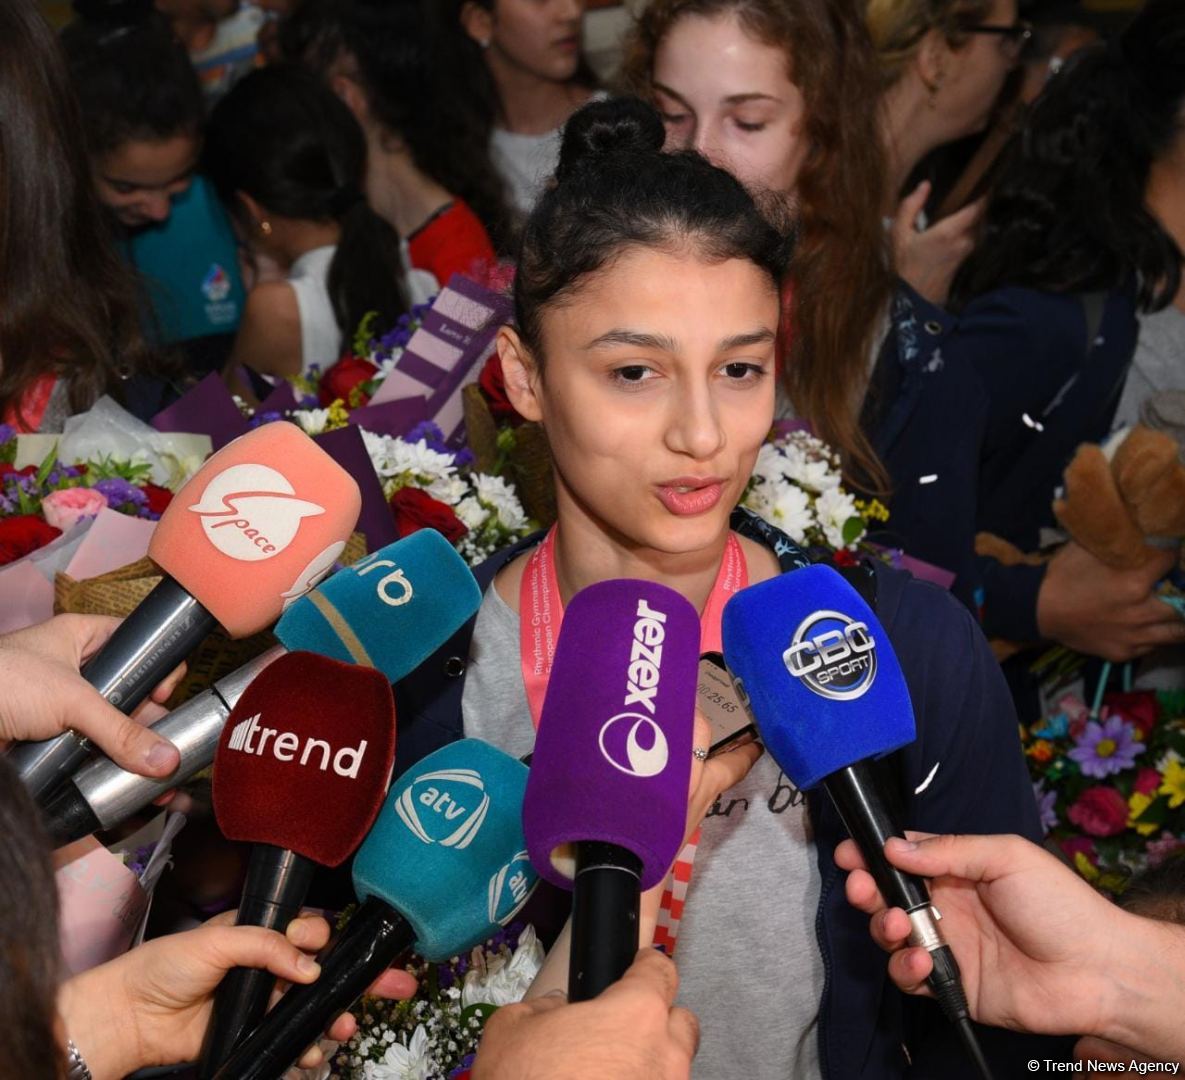 Azerbaijani gymnasts return from European Championship in Israel with four medals (PHOTO)